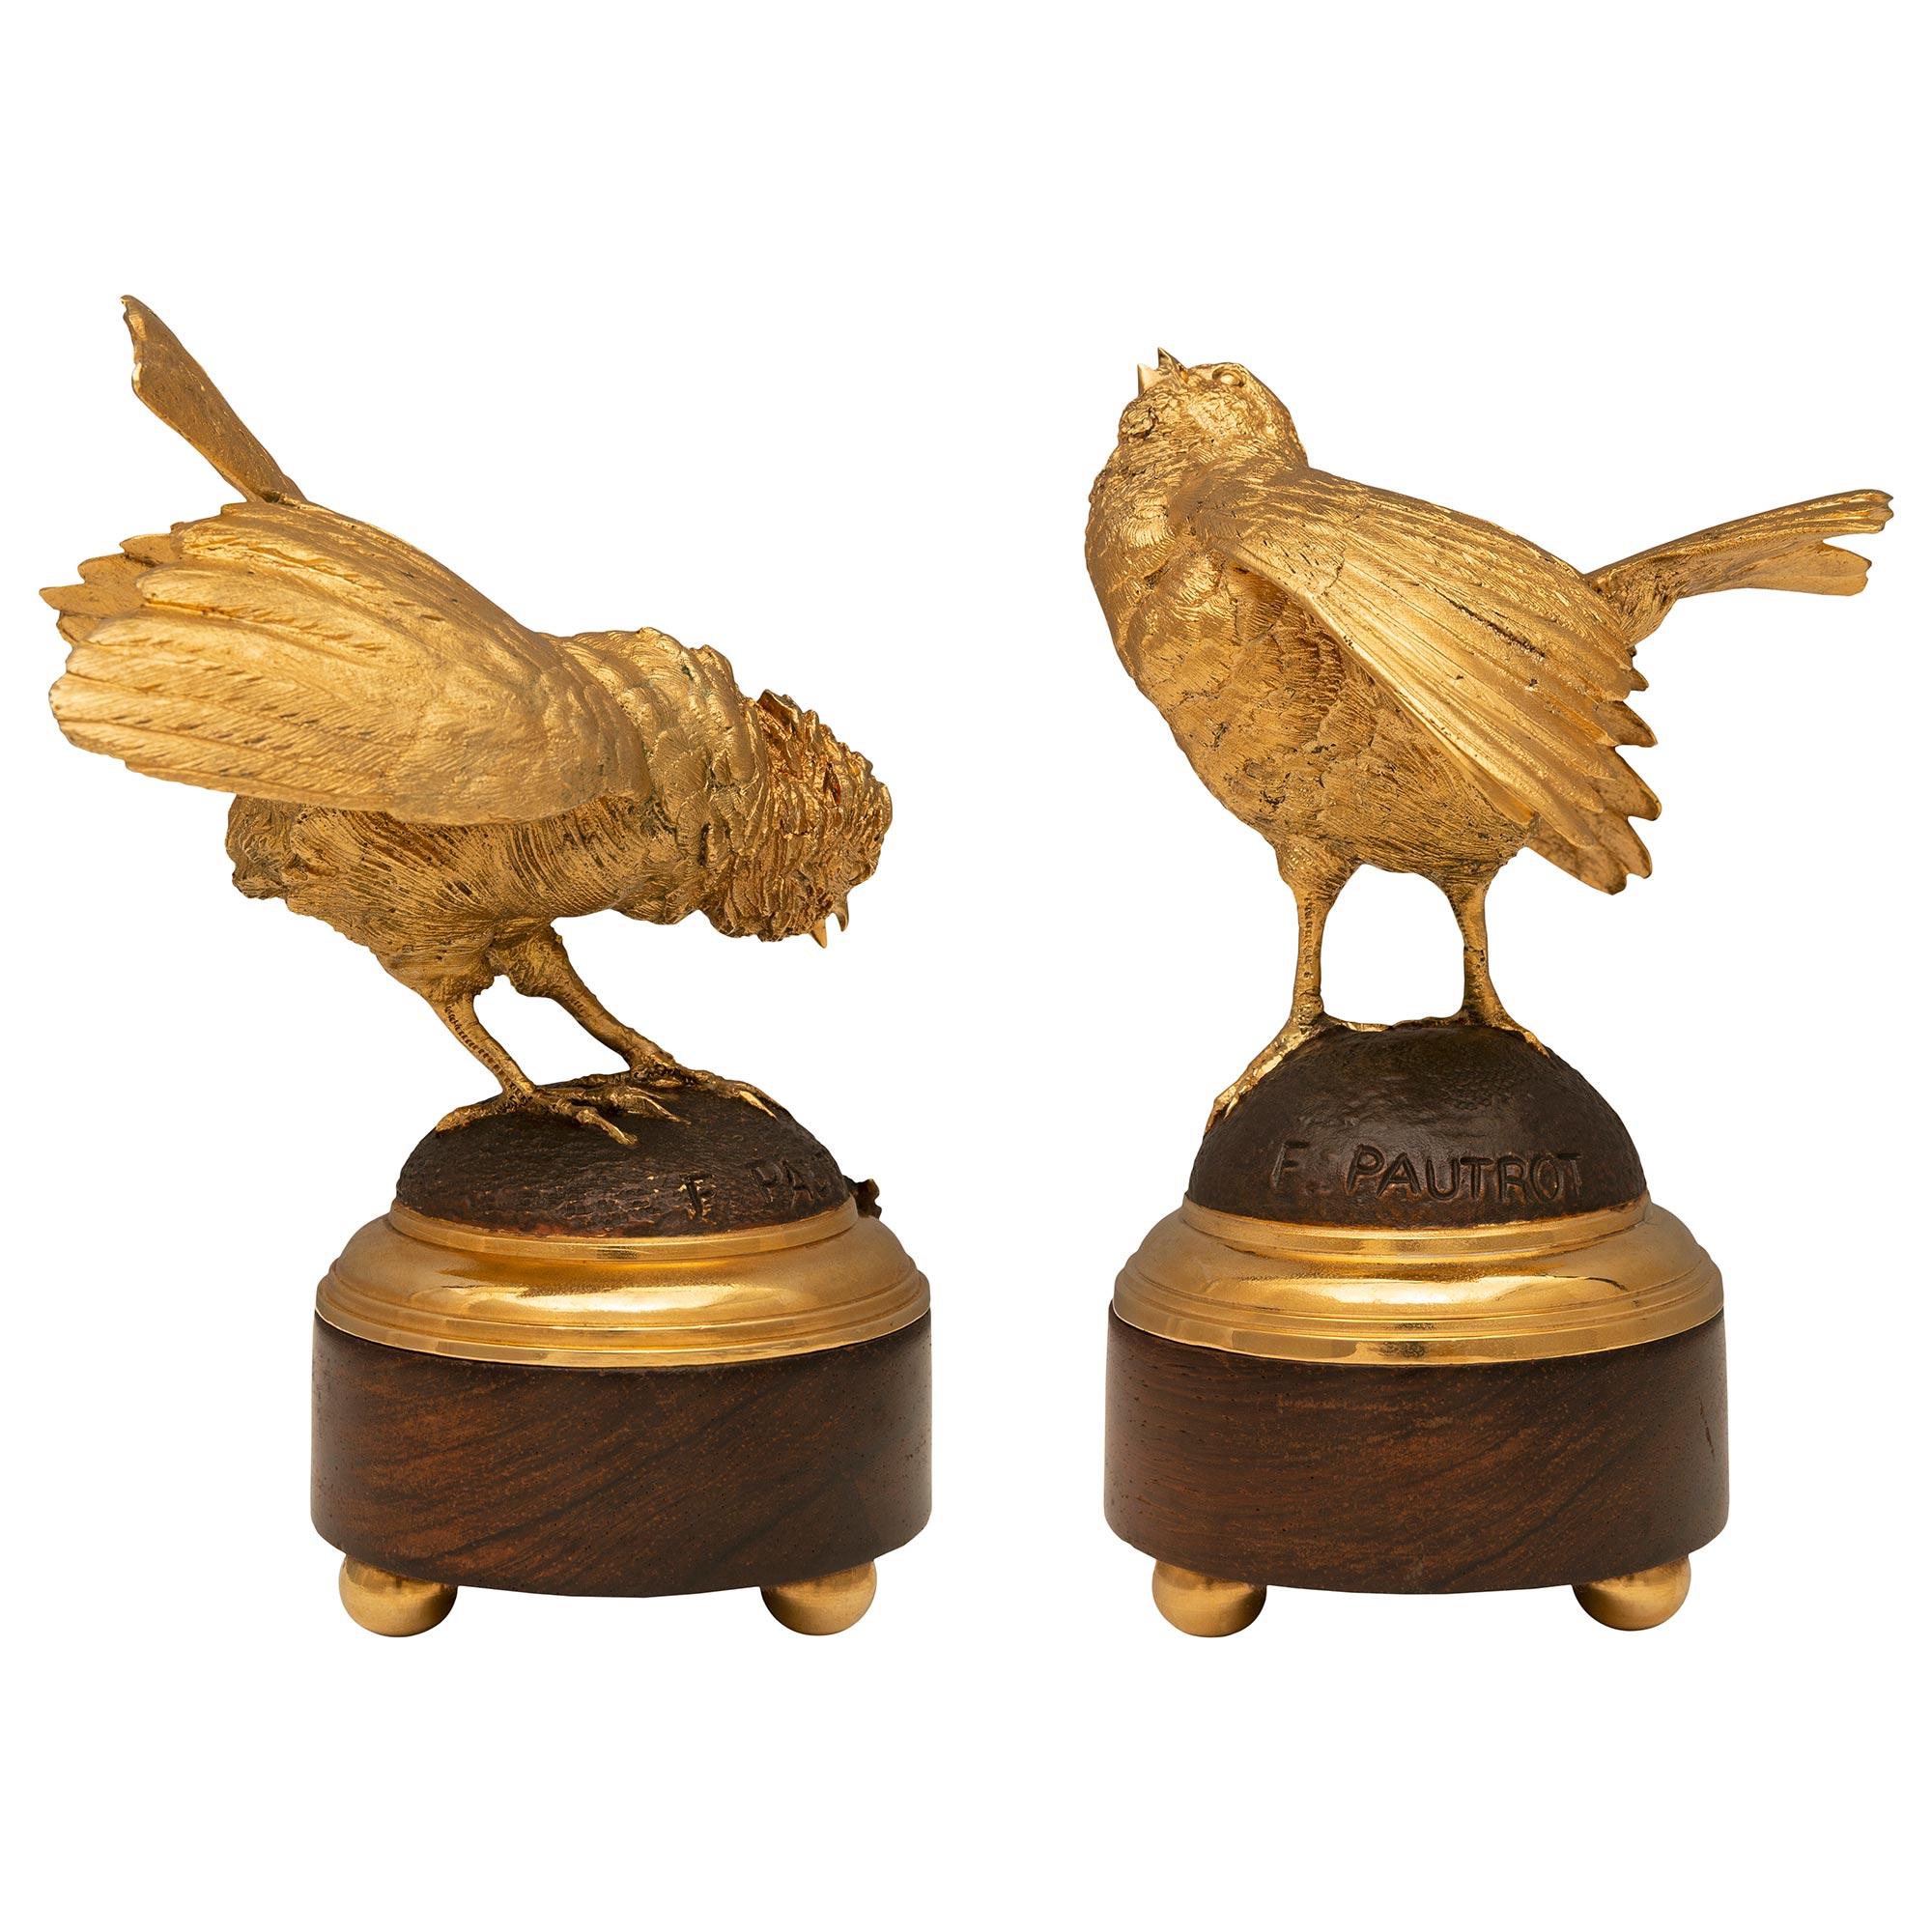 A charming and very high quality small scale pair of French 19th century Louis XVI st. Belle Époque period ormolu, patinated bronze and Walnut statues signed F. Pautrot. Each statue is raised by three elegant ball feet below the circular Walnut base